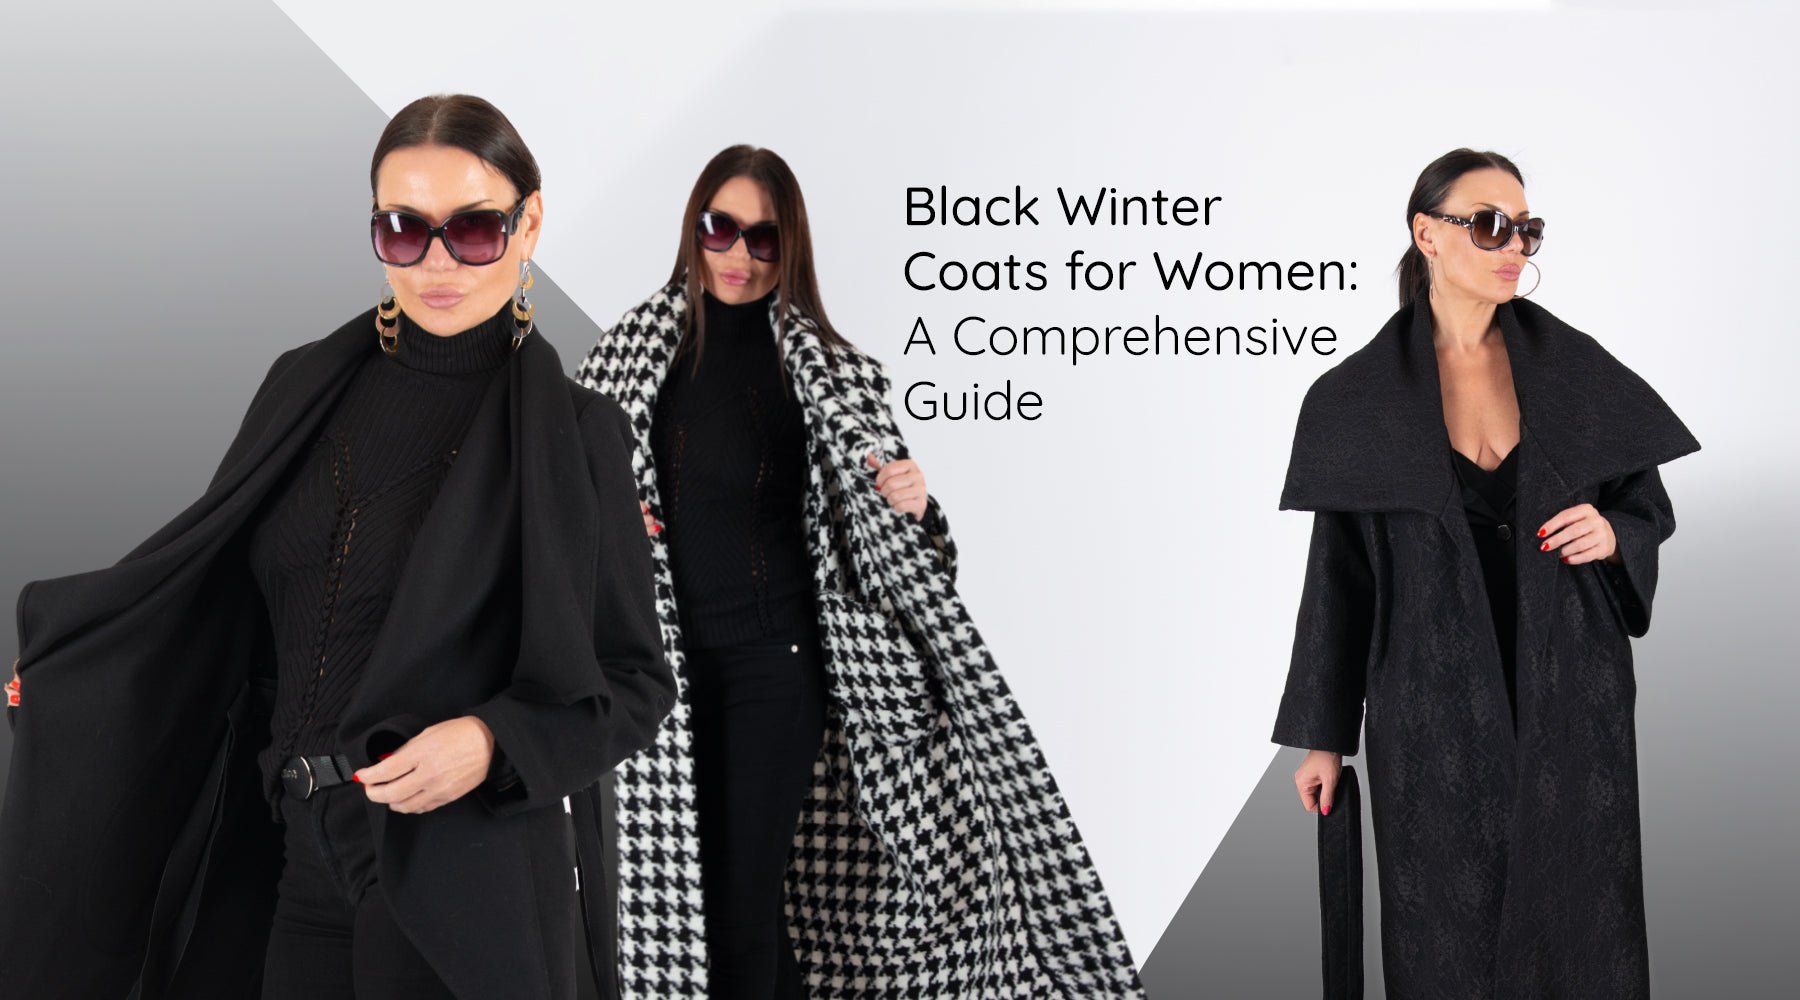 Black Winter Coats for Women: A Comprehensive Guide